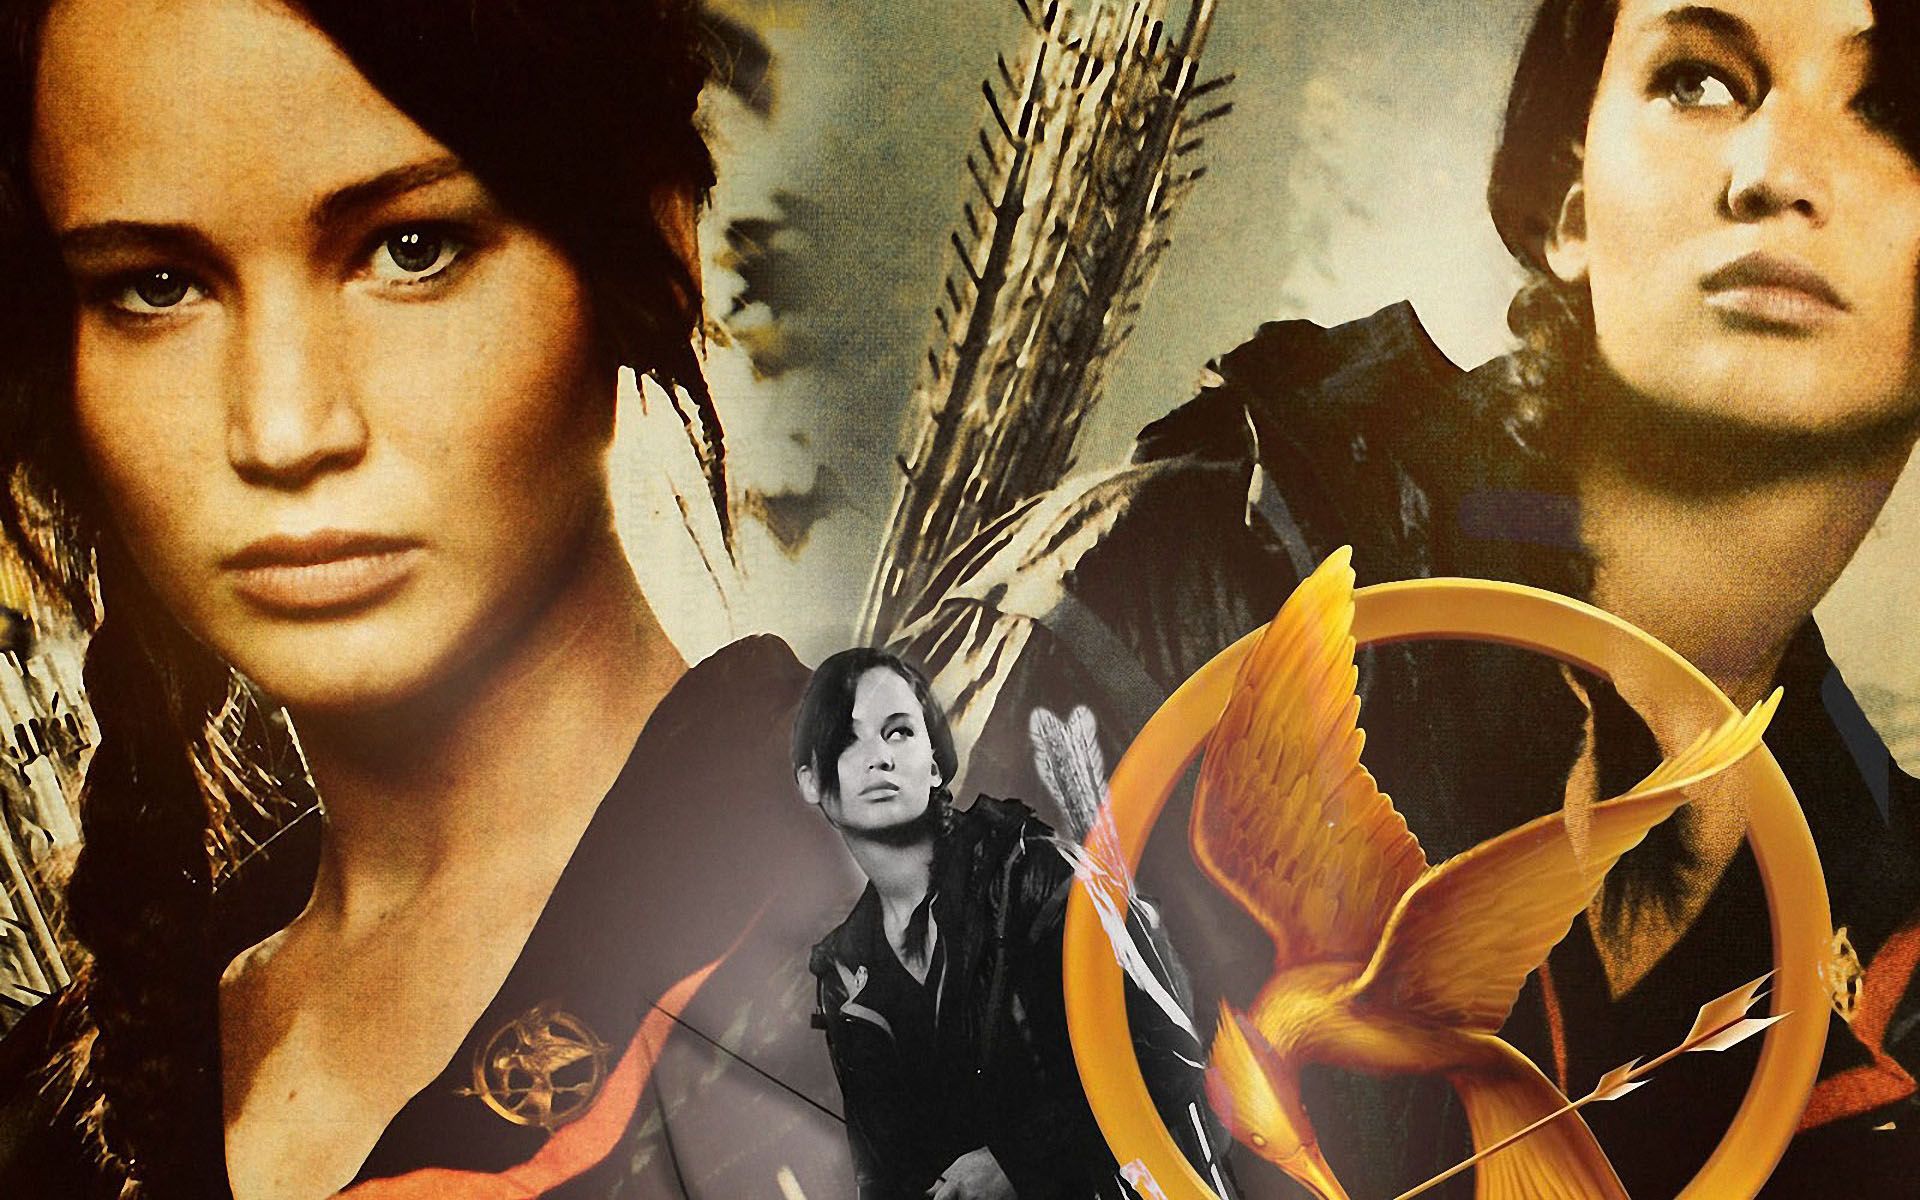 Hunger Games desktop wallpapers - Popular book goes to be a movie